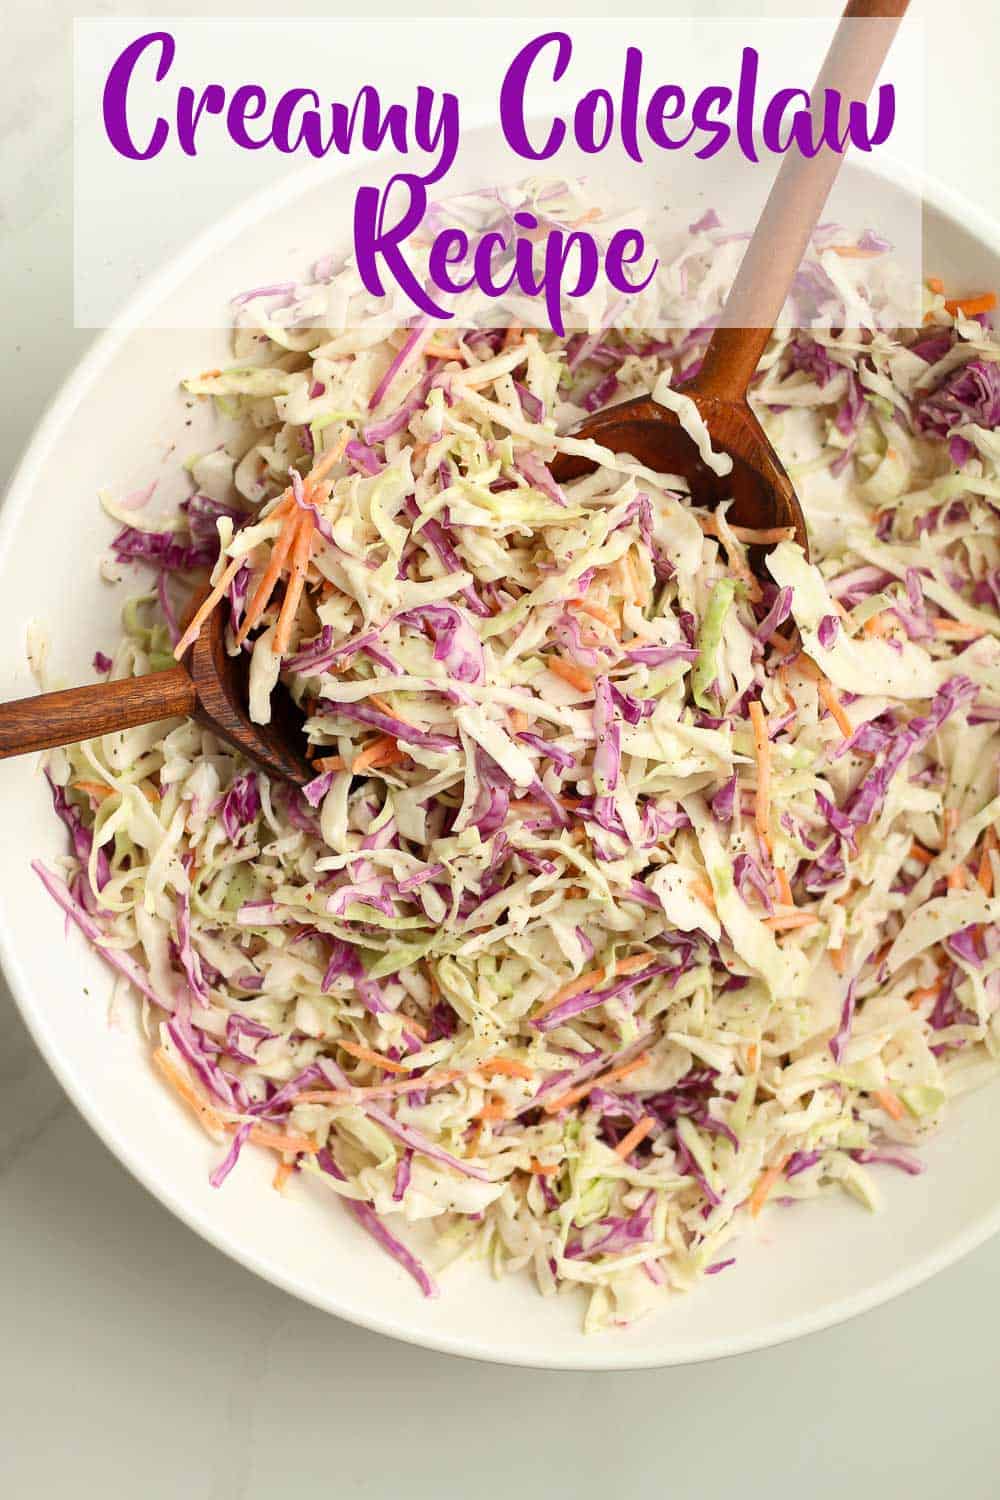 A large bowl of creamy coleslaw with wooden spoons.